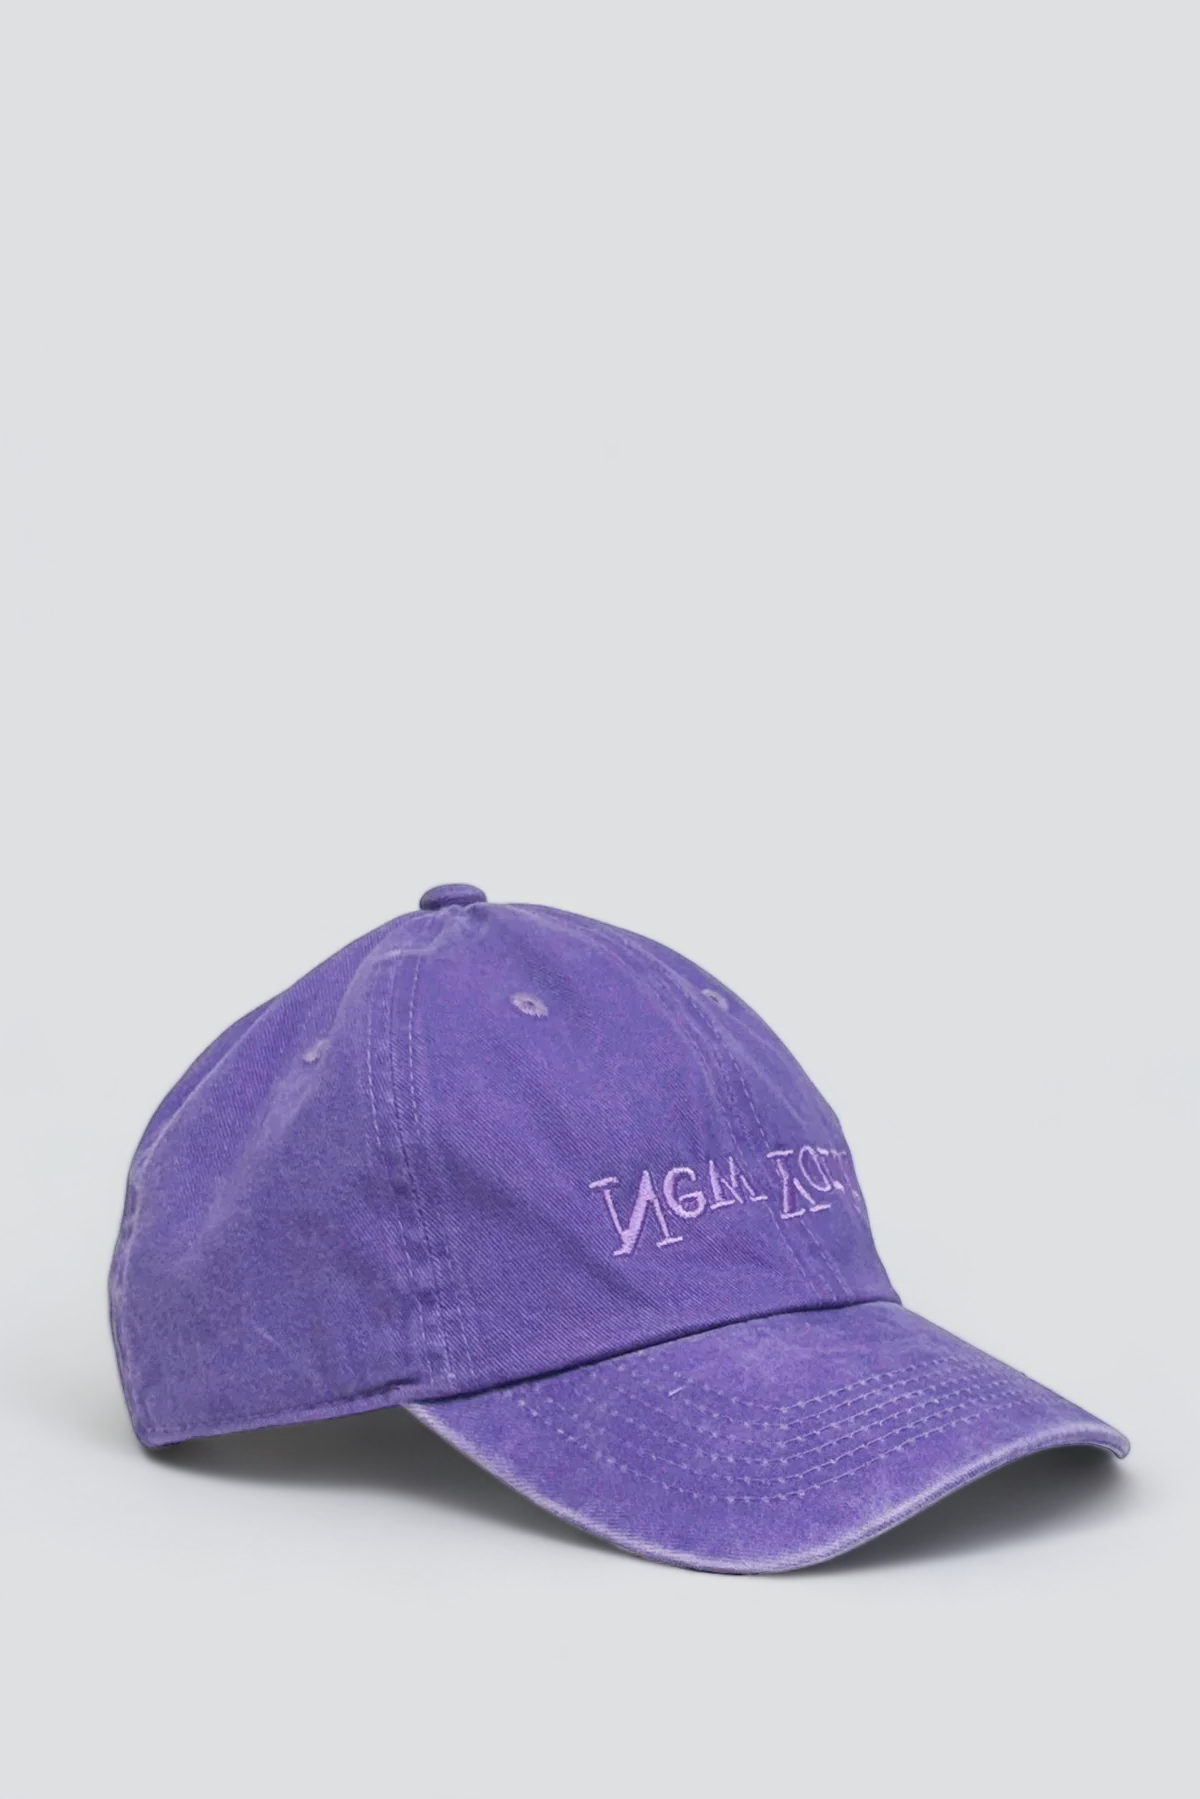 New York Embroidered Hat - Washed Purple